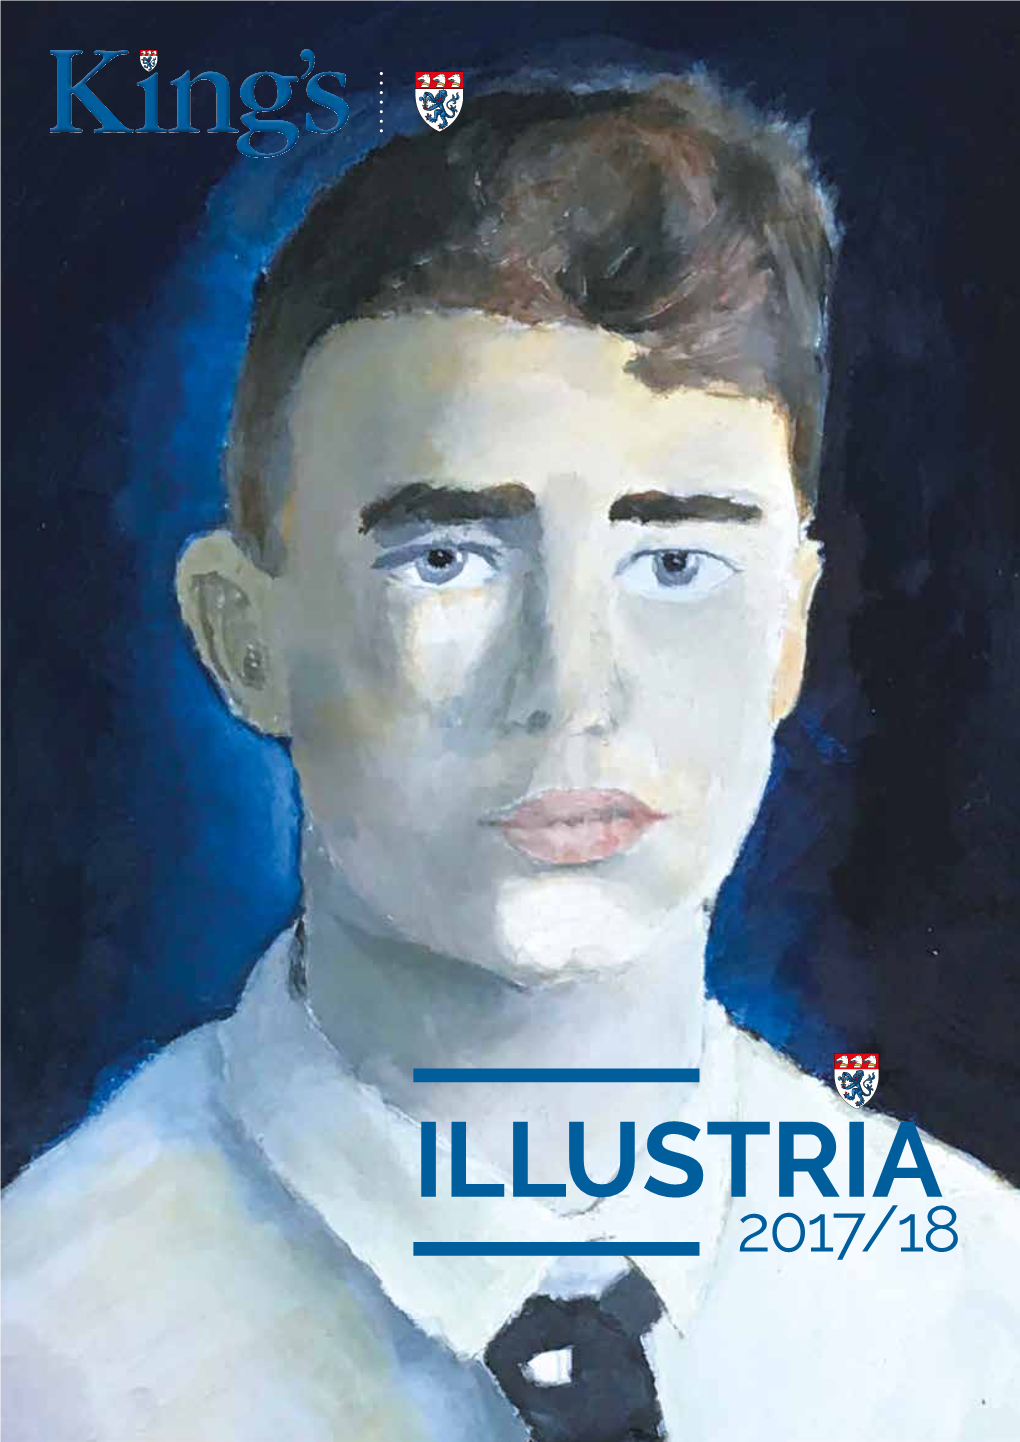 ILLUSTRIA 2017/18 Illustria Headmaster’S REPORT 2017/18 We Take a Look Back at the Highlights of the School Year